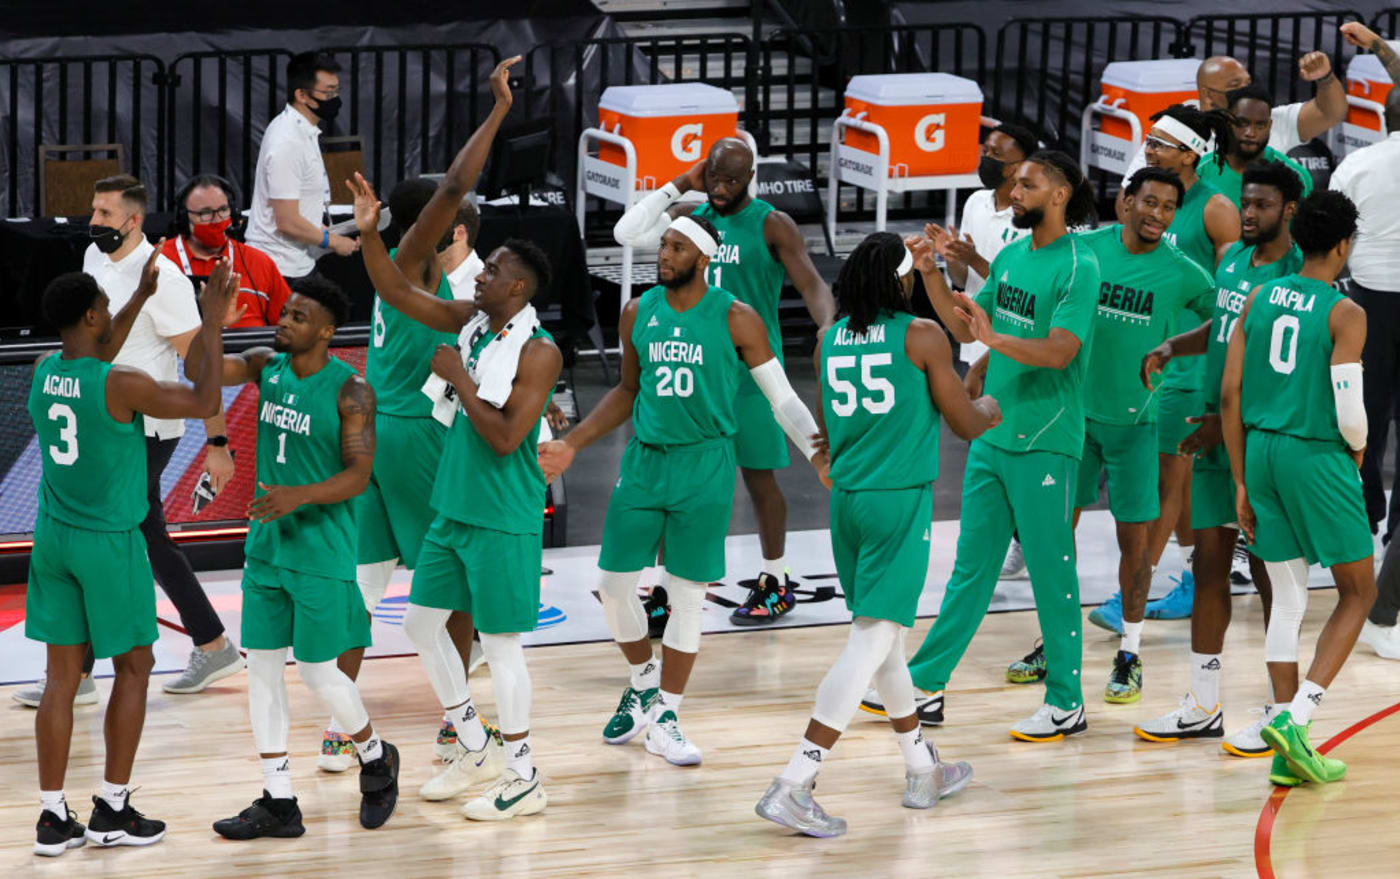 The Story Behind The Popular Nigerian Basketball Team S Twitter Account Complex